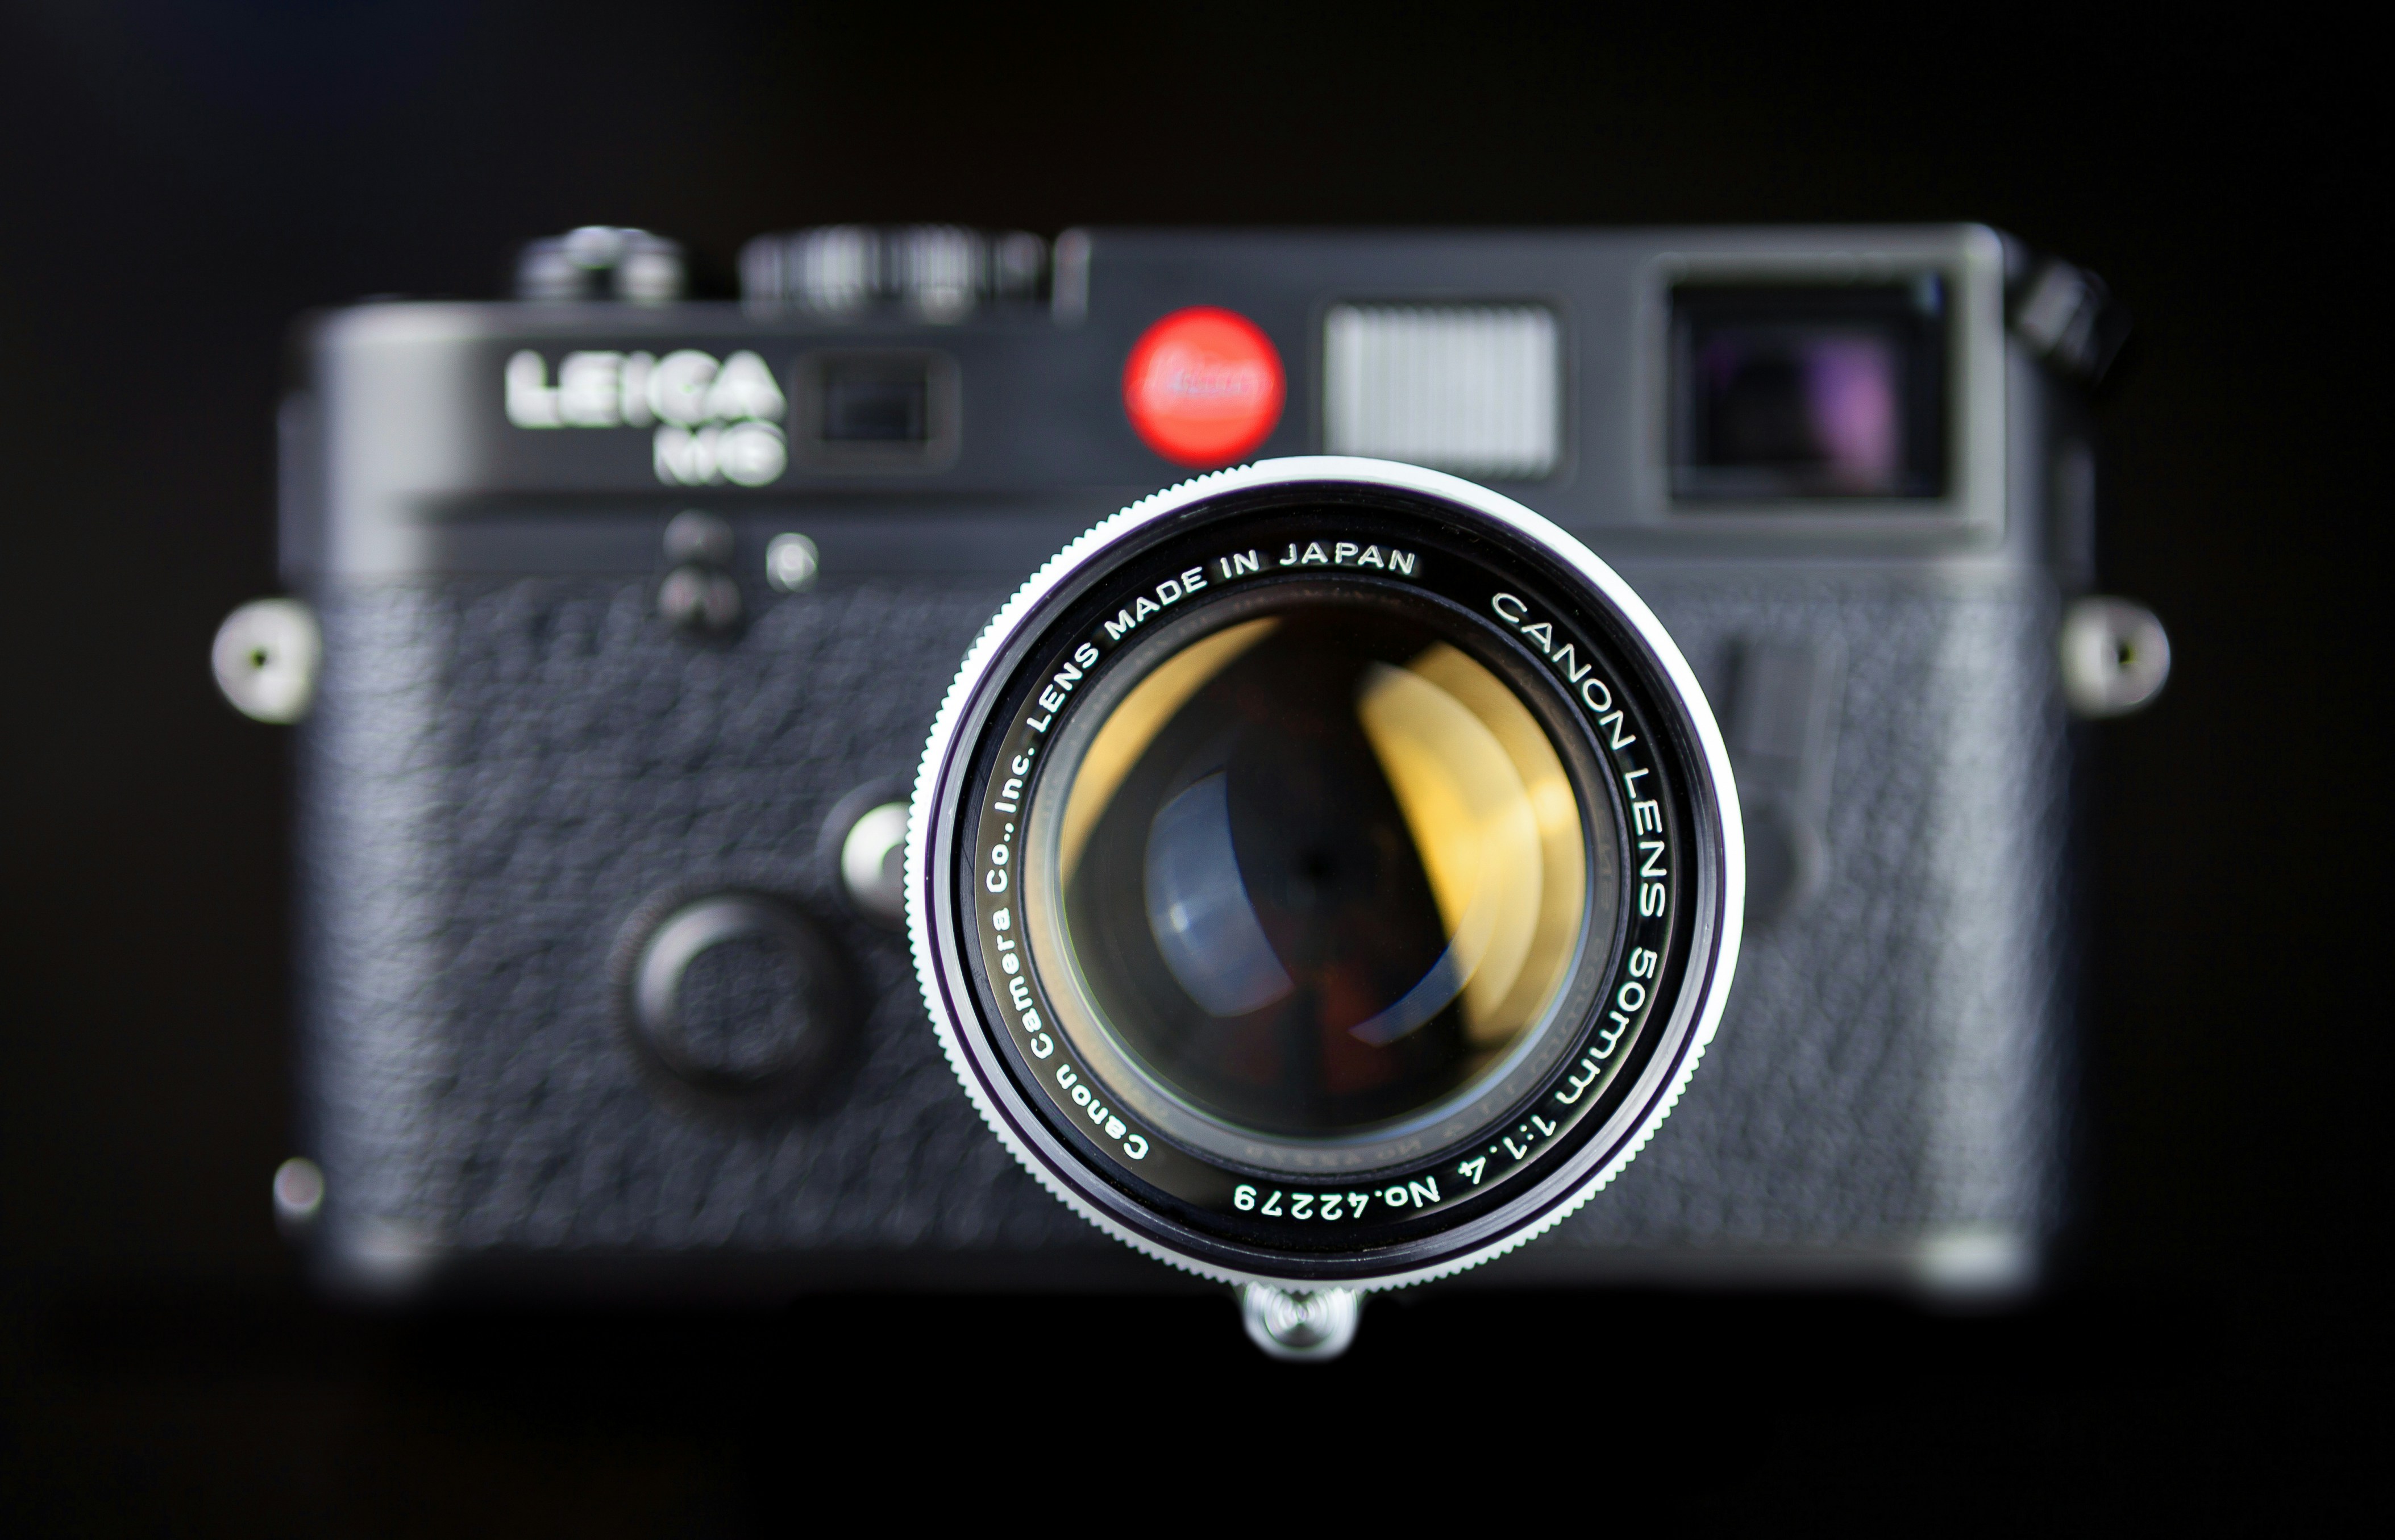 A Leica M6 TTL in black with a Canon 50mm LTM f/1.4 lens on a dark Background.